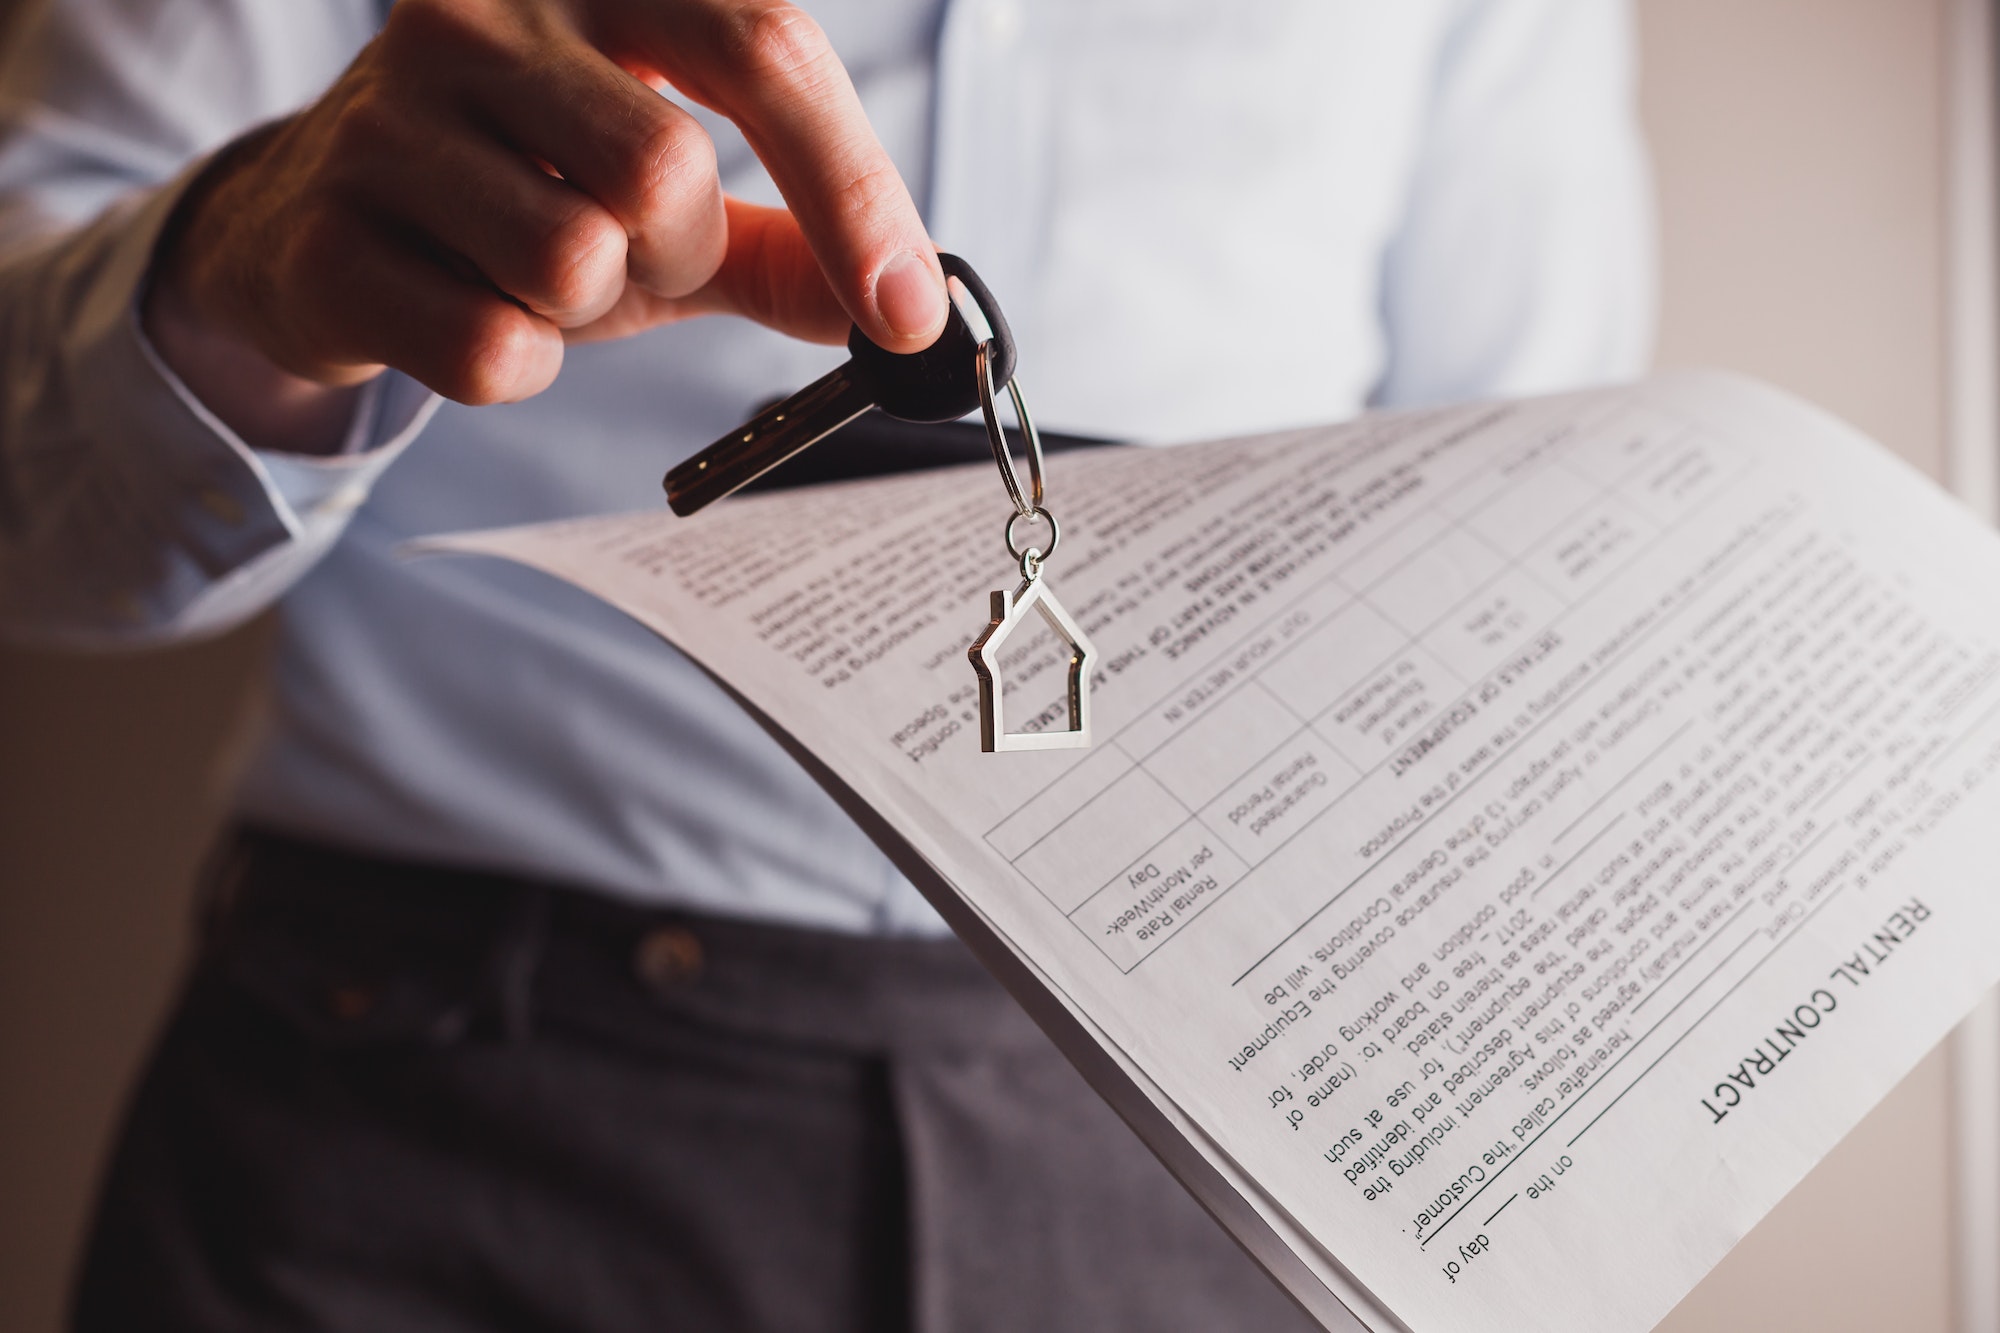 Manager offers keys to house holding contract in other hand. Rental and buying a property